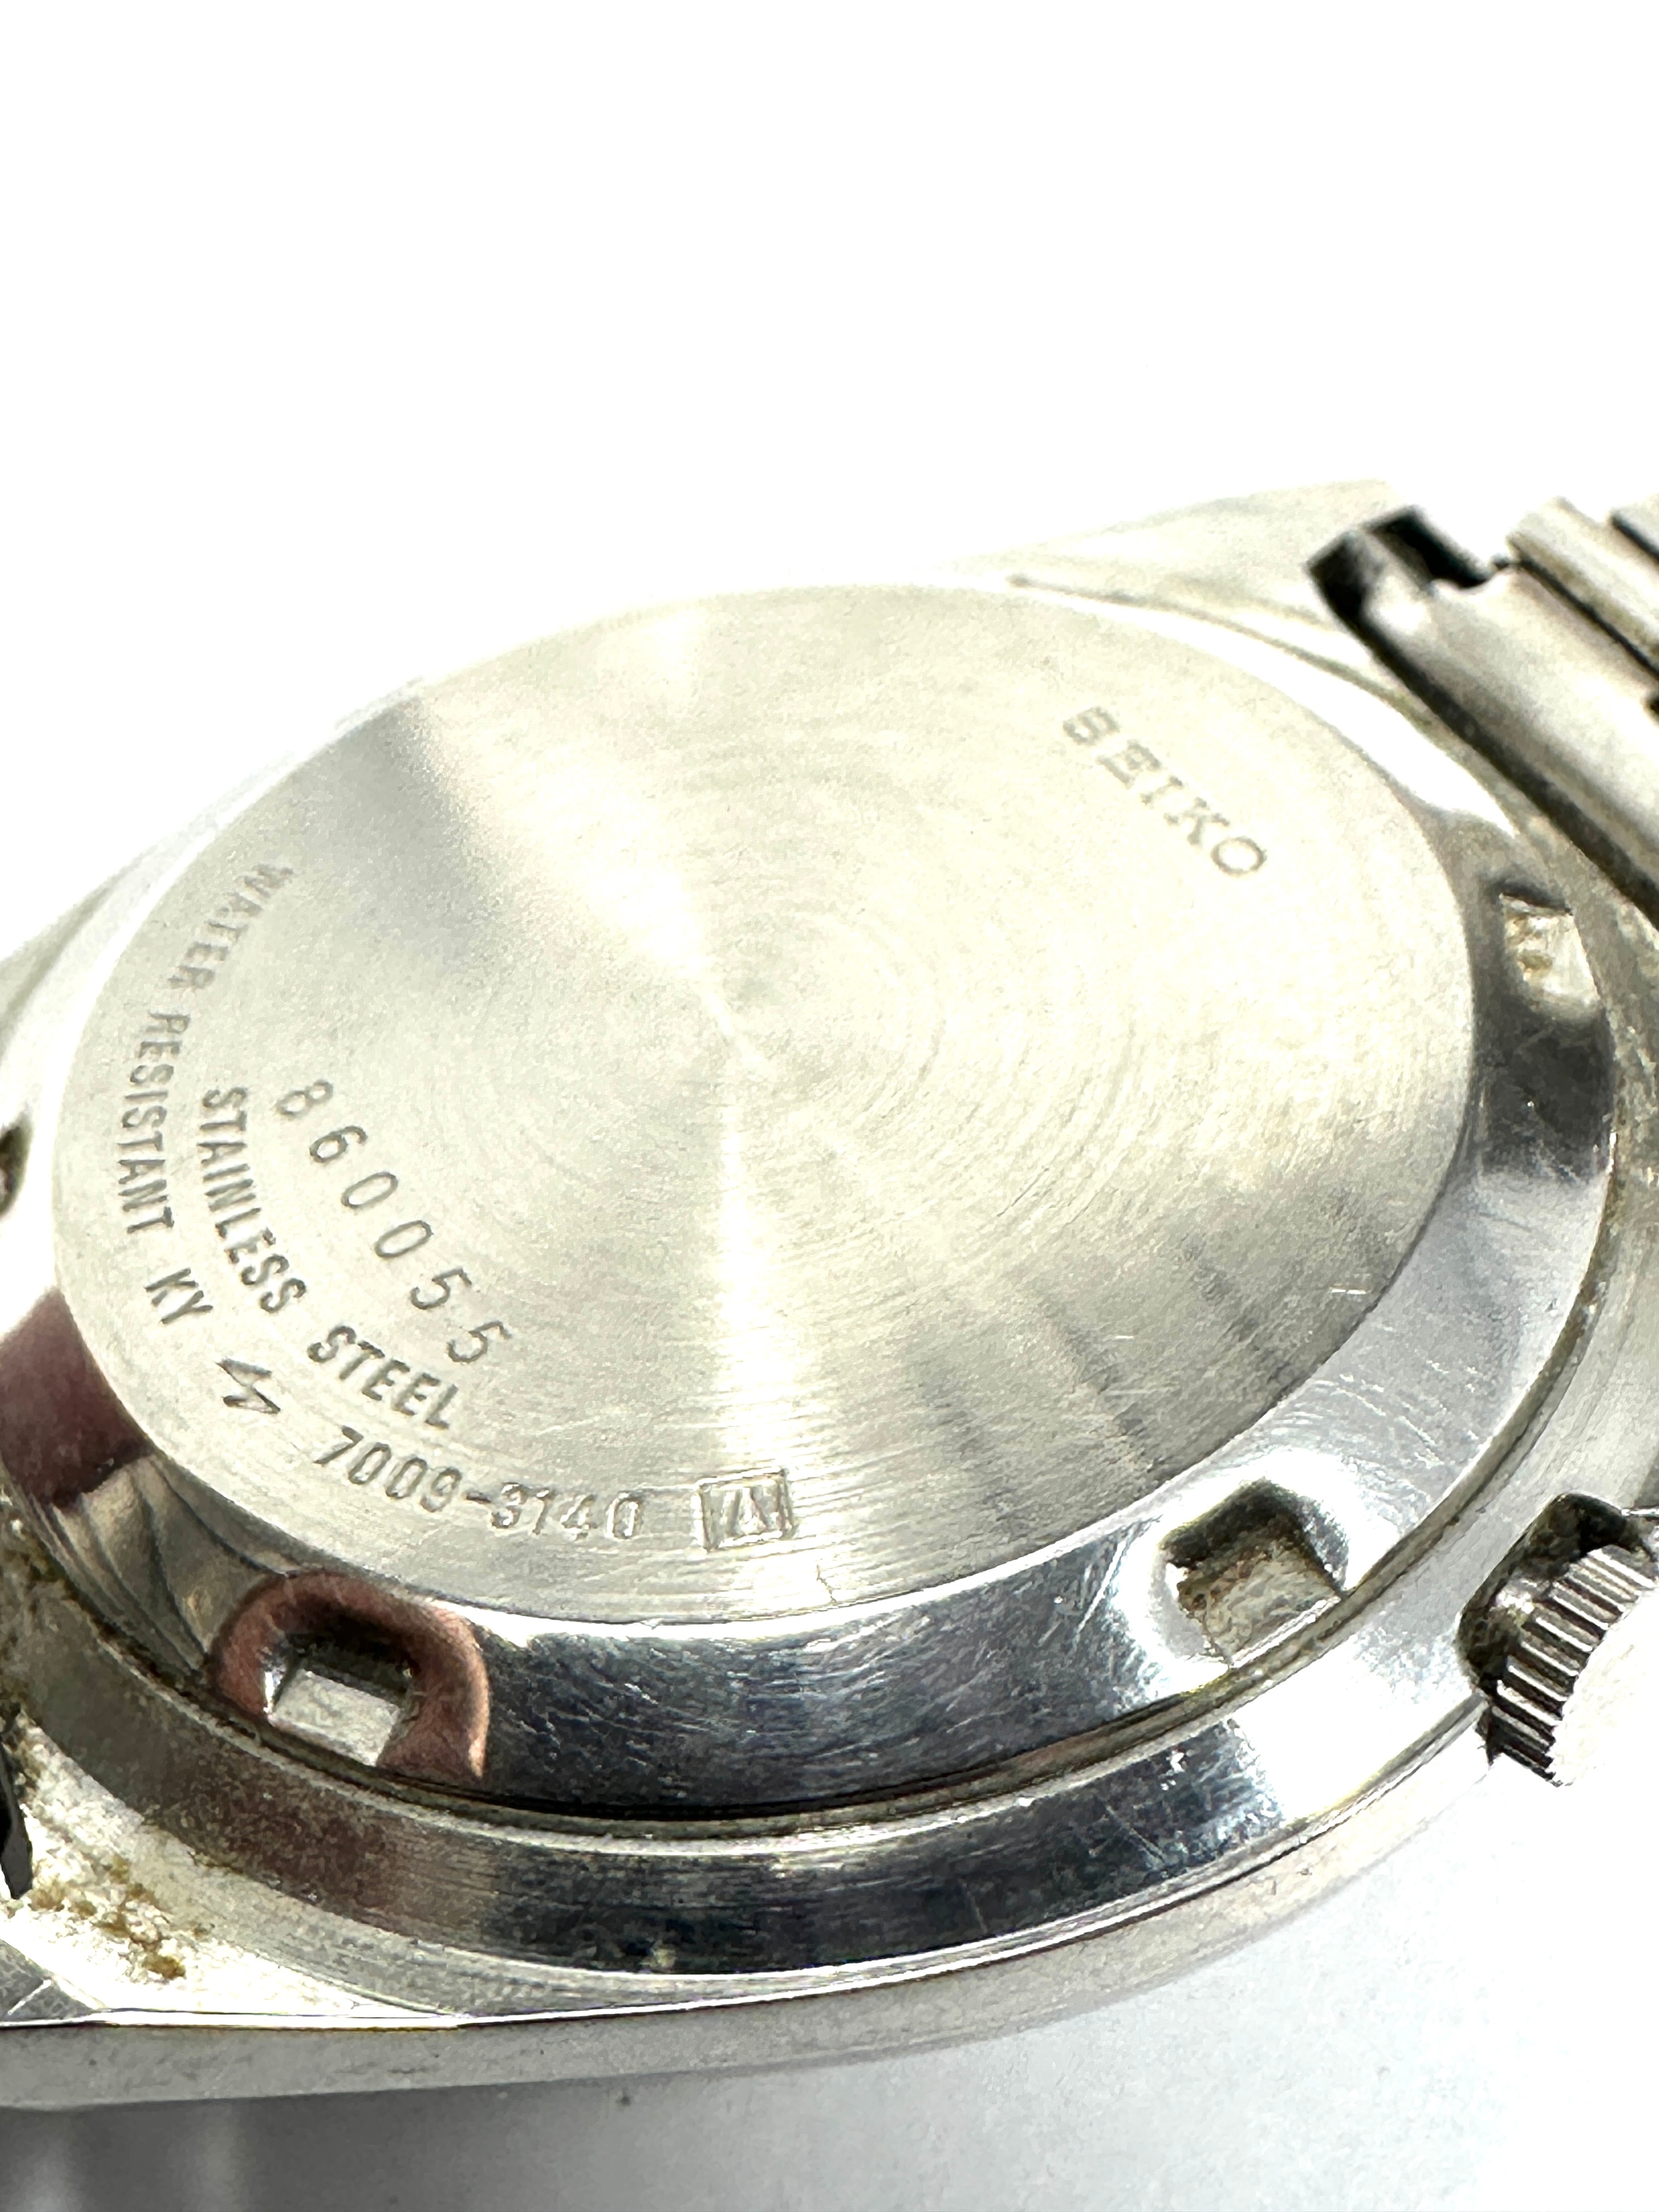 Vintage Gents Seiko automatic 7009-3140 wrist watch the watch is ticking - Image 3 of 3